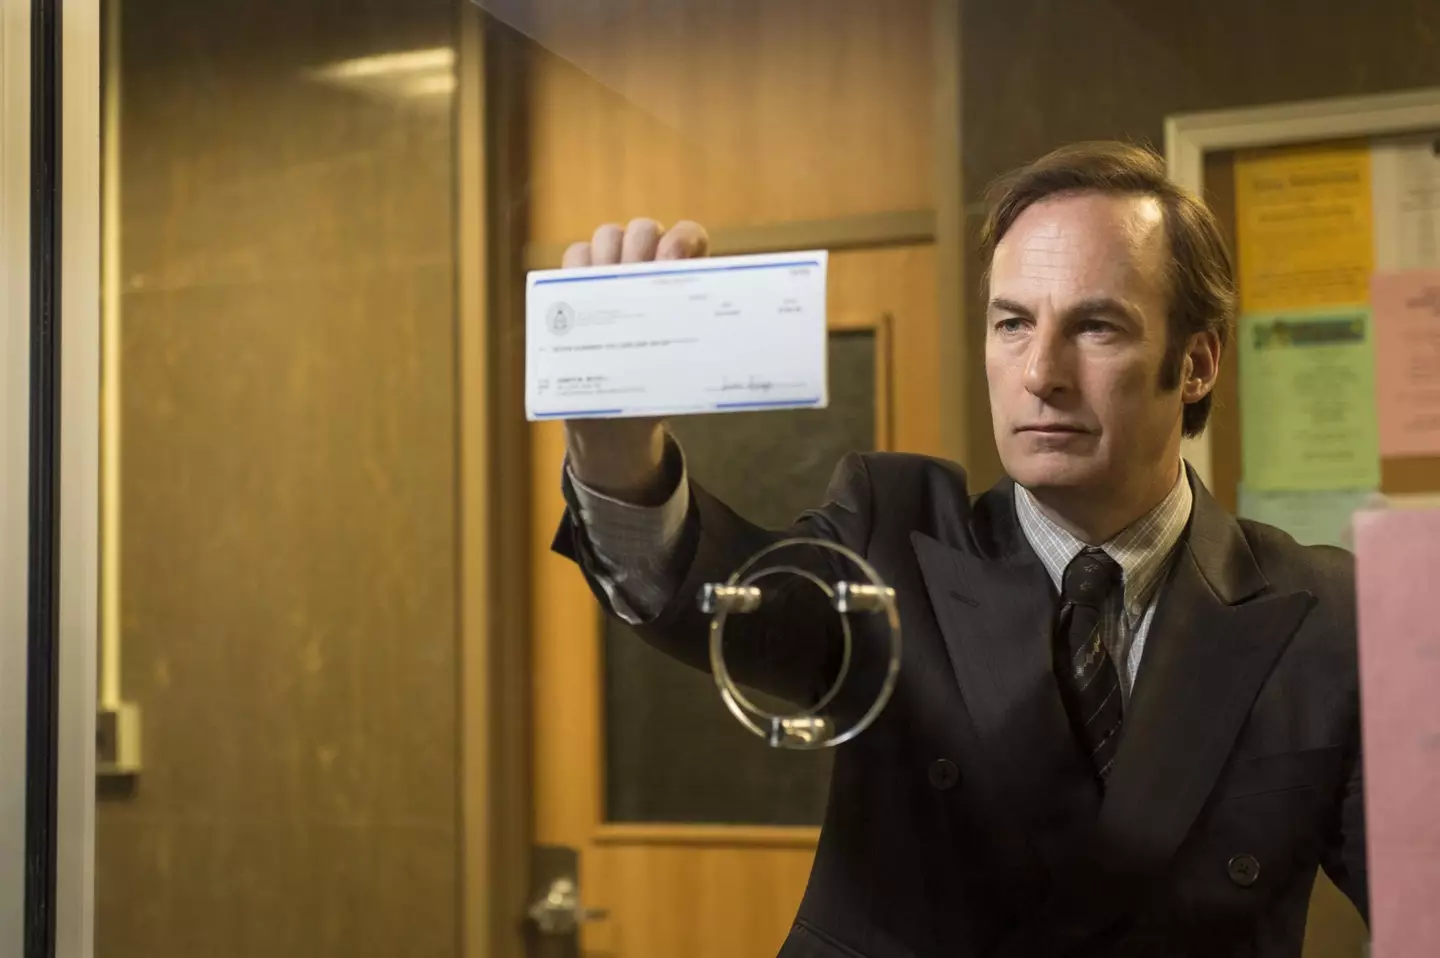 The actor is best known for his starring role in Better Call Saul.